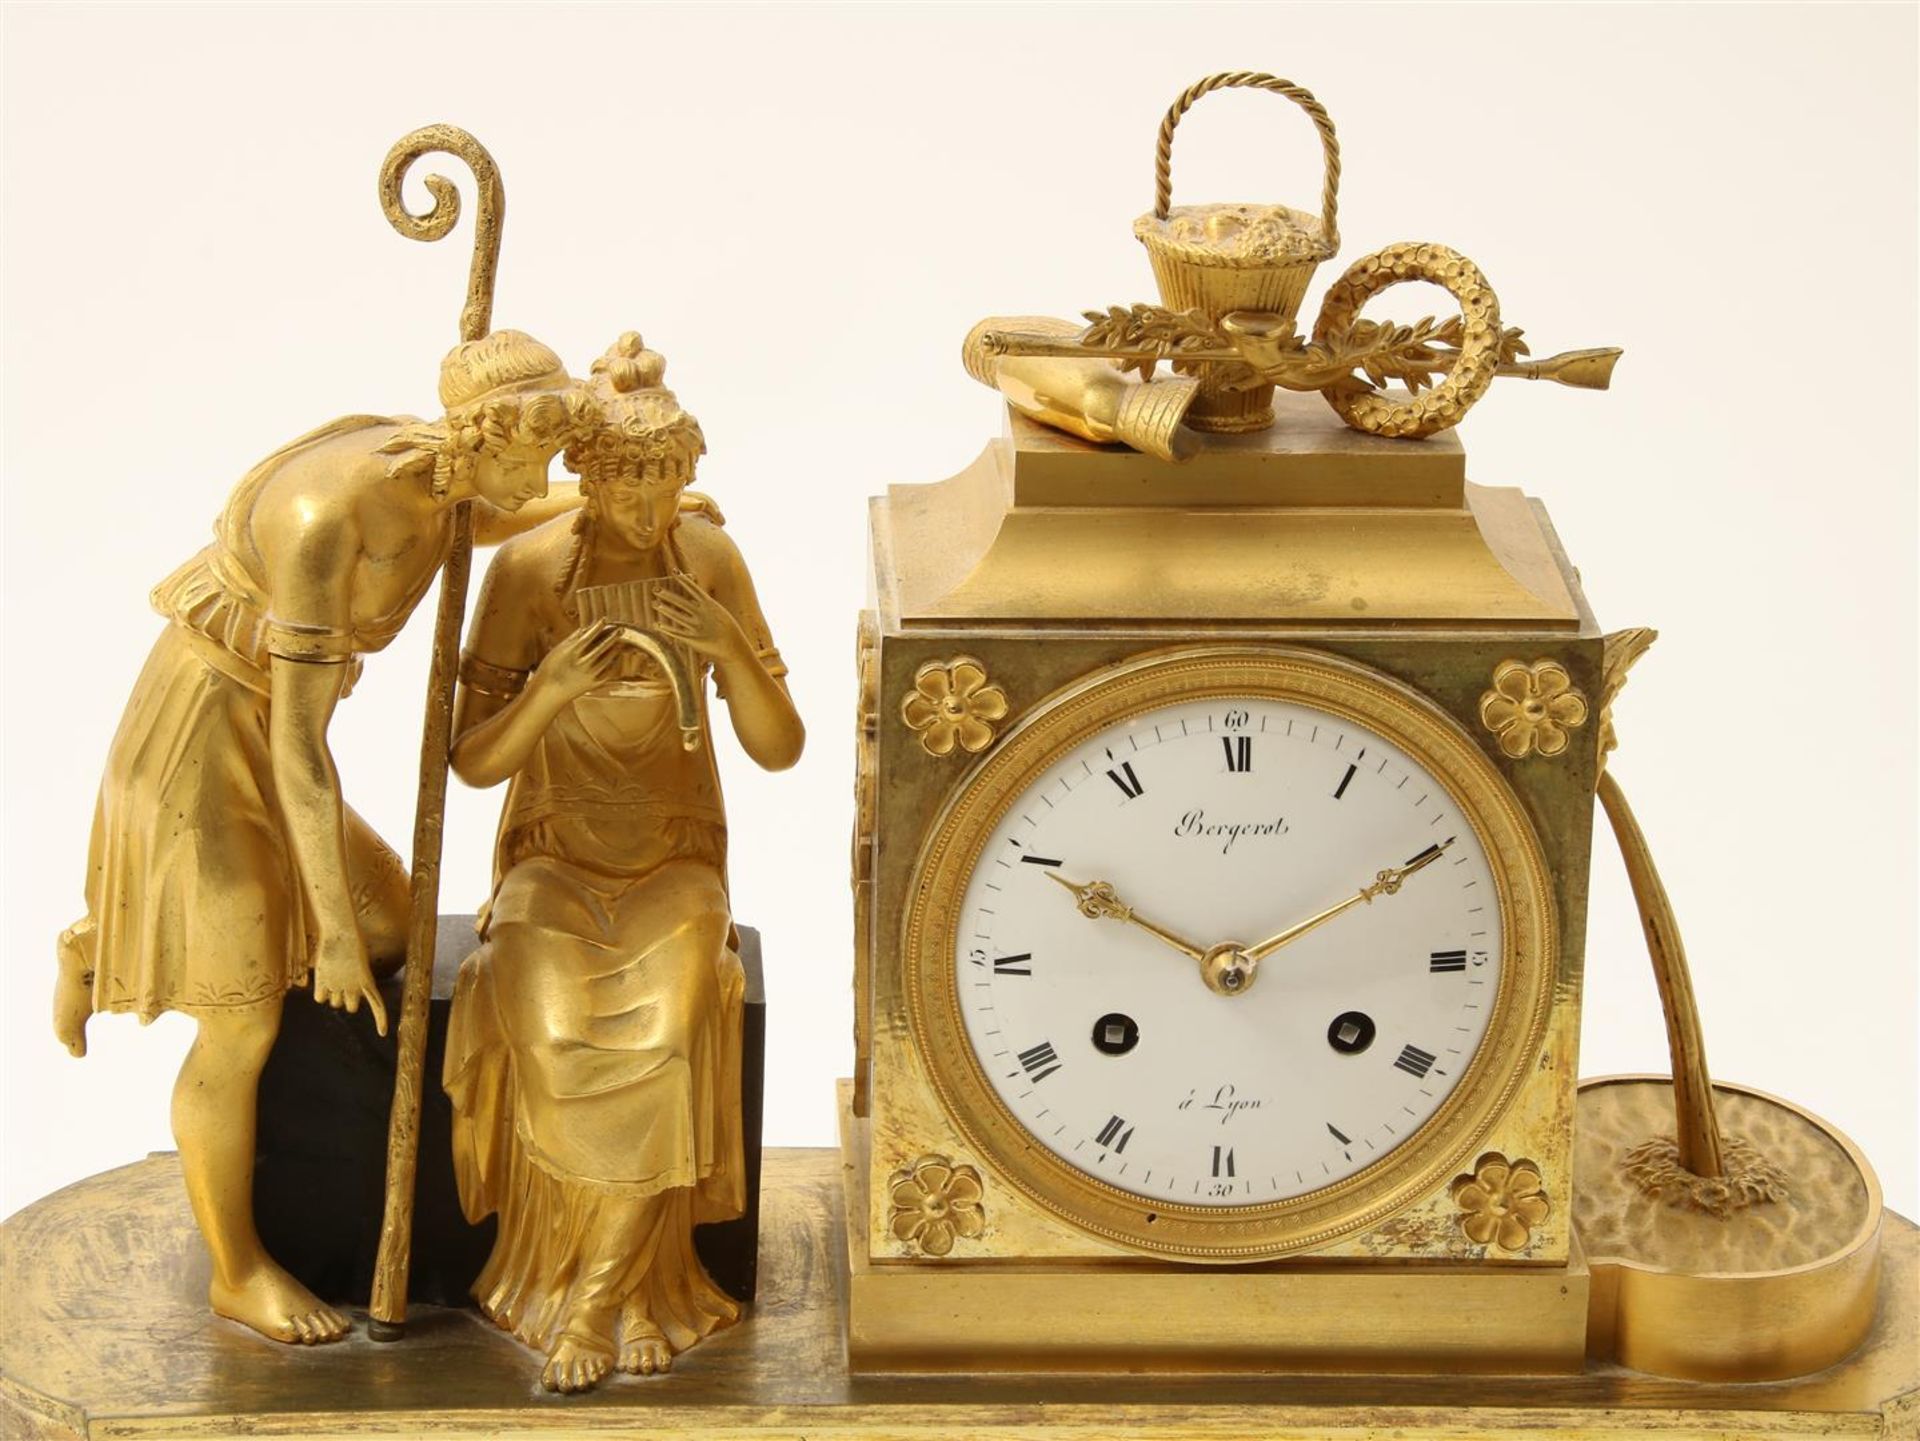 Ormolu bronze Empire mantel clock, crowned with shepherd with staff and shepherdess with pan - Image 3 of 9